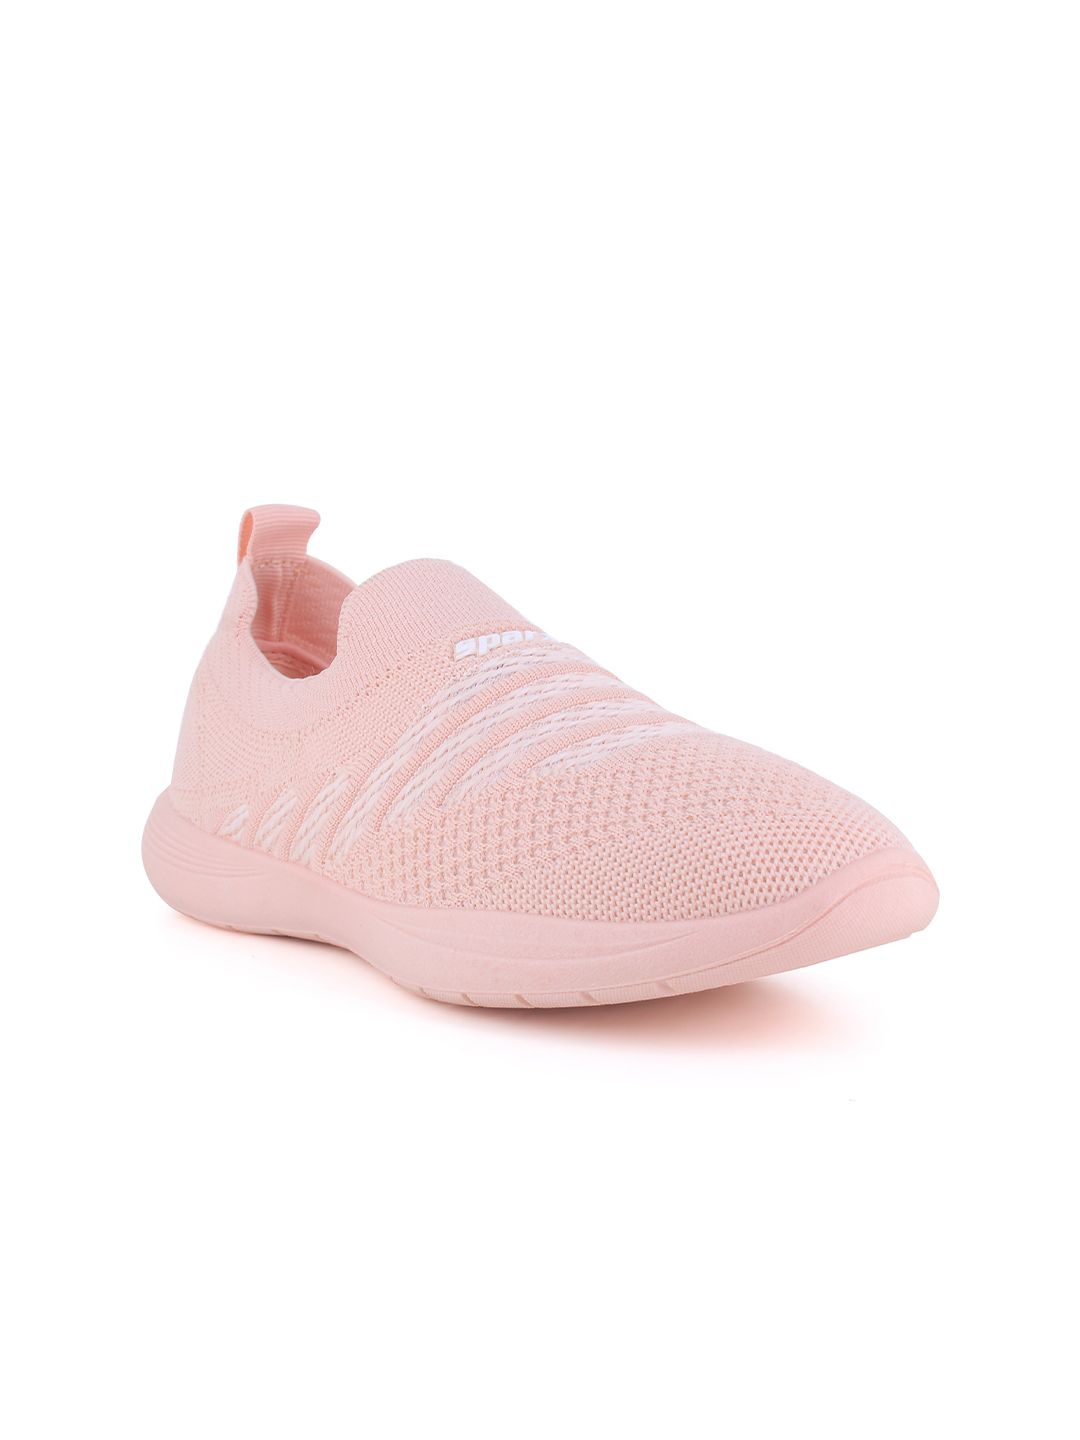 Sparx Women Peach-Coloured Mesh Running Non-Marking Shoes Price in India